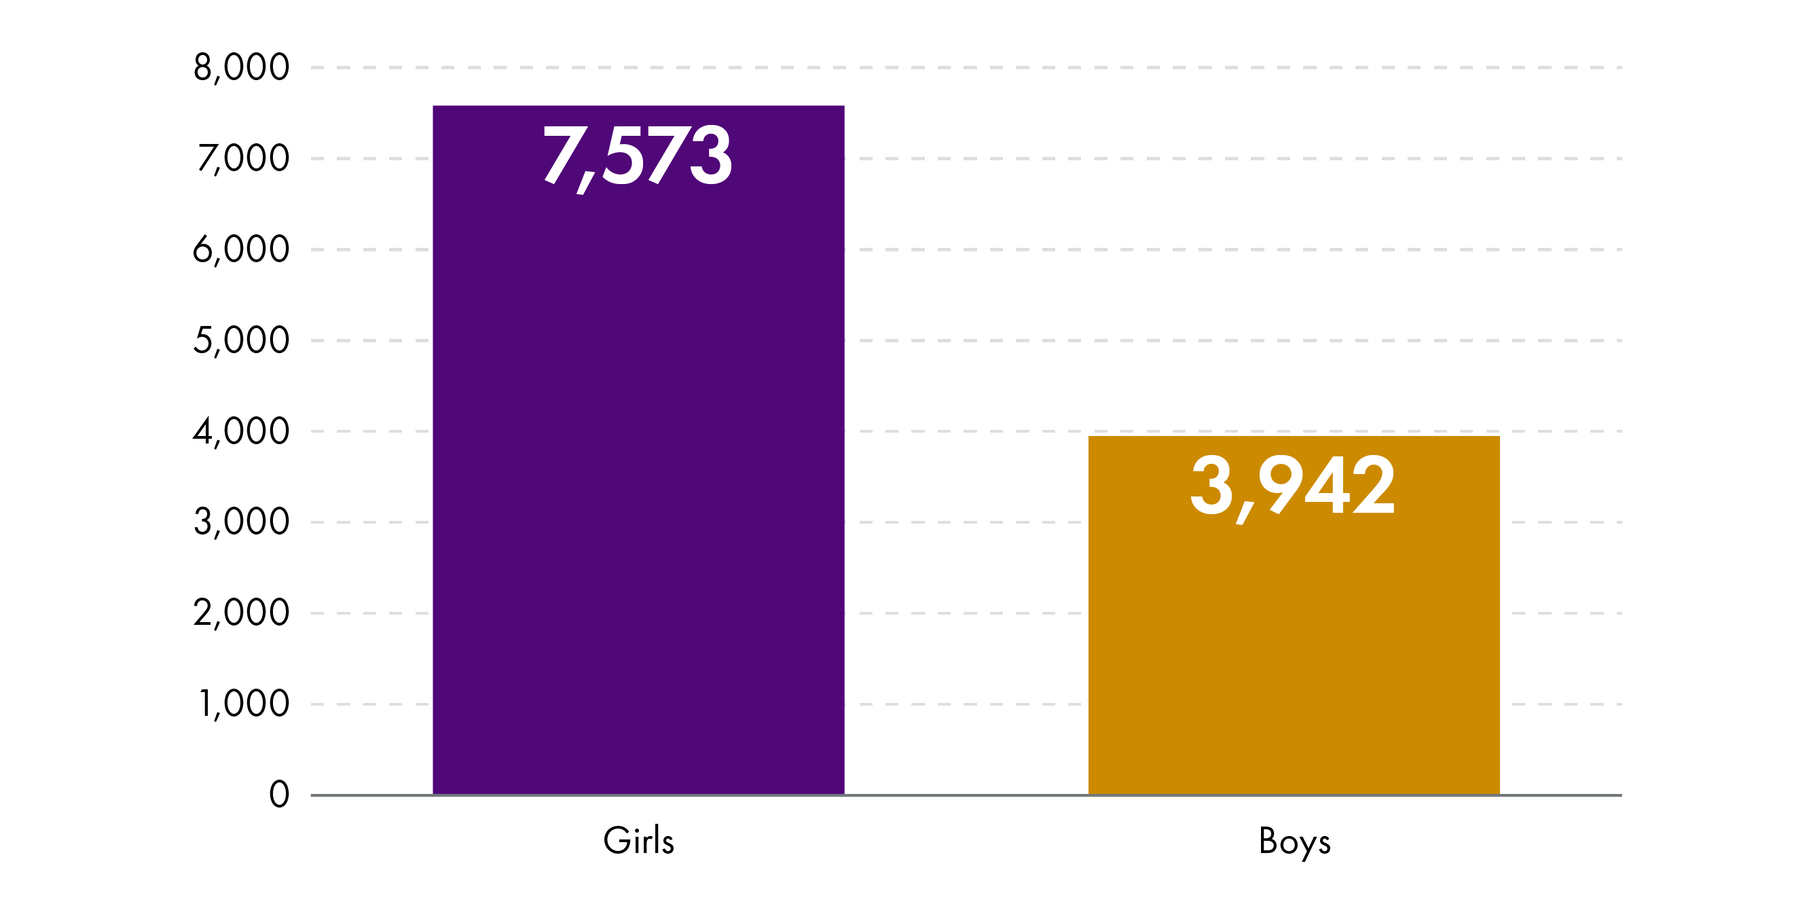 A graph comparing the number of girls accessing school counselling to the number of boys. Figures are provided in the description.